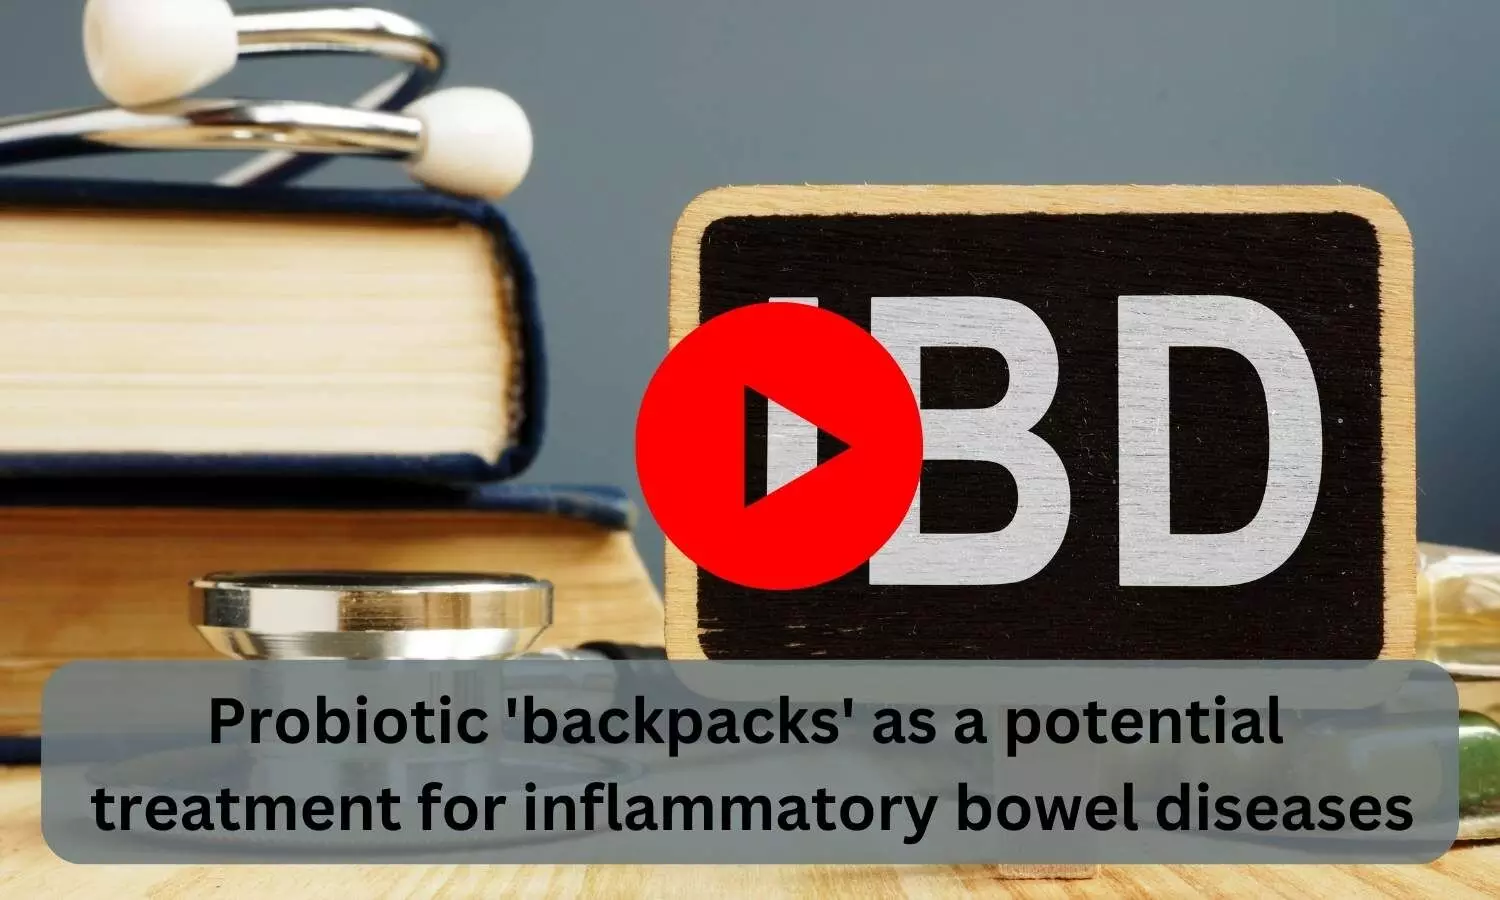 Probiotic backpacks as a potential treatment for inflammatory bowel diseases